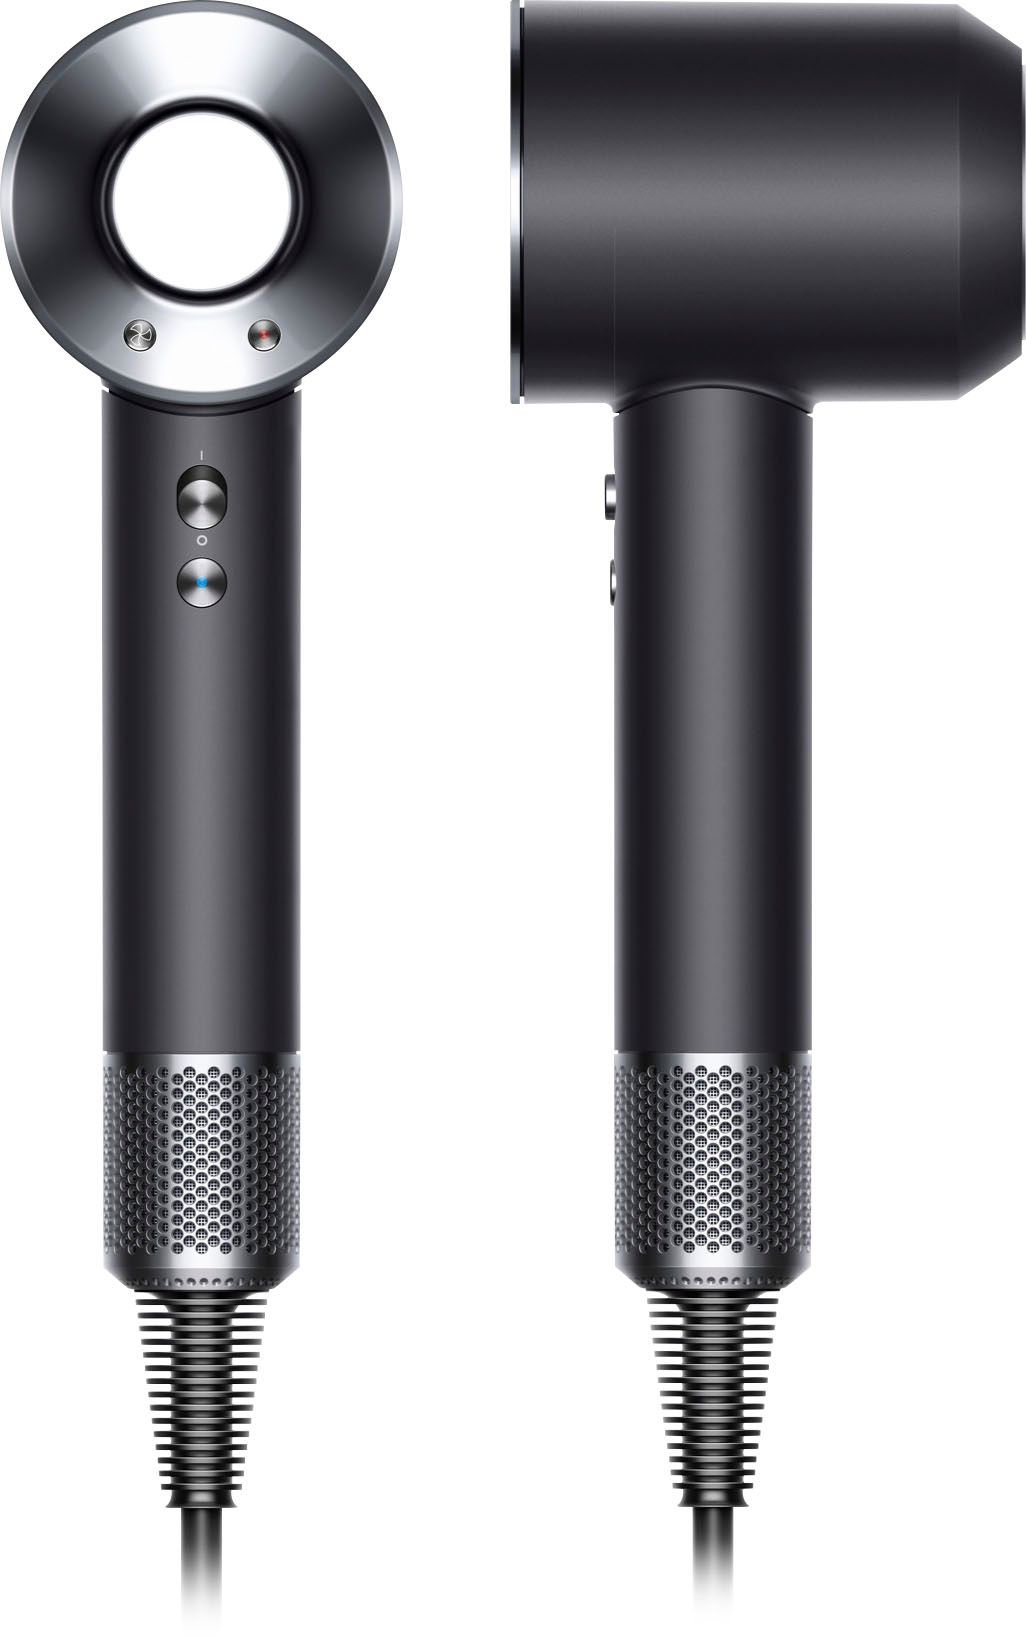 Dyson Supersonic Hair Dryer Black/Nickel 475605-01 pic pic